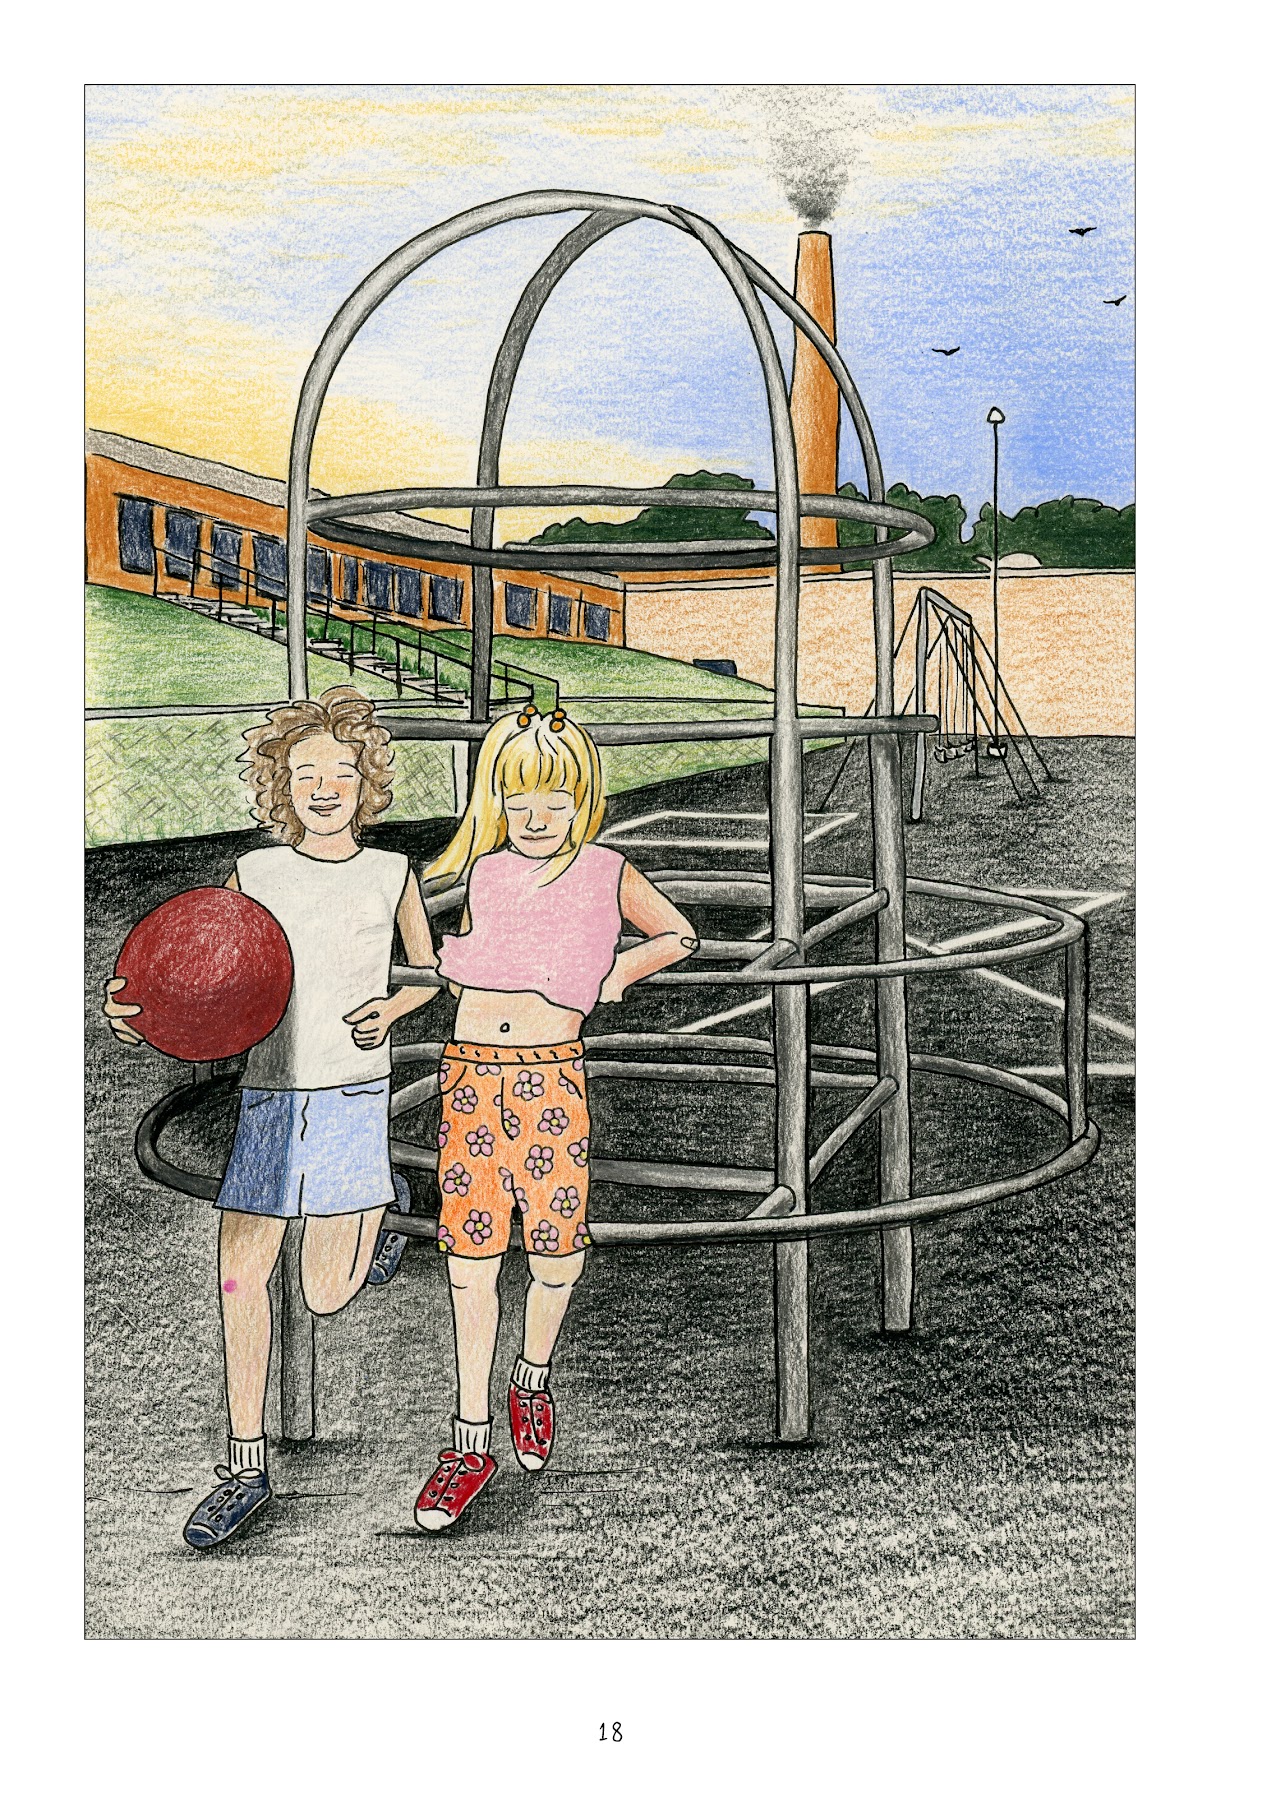 Full page drawing in full color of two girls leaning against playground equipment at Armatage Elementary. One girl has curly hair and holds a large red ball. She wears a white muscle tee, jean shorts, and black sneakers. The other girl, Lynn, has bangs and long straight strawberry blonde hair done up in pig tails with decorative clips. She wears a pink shirt, which blows in the wind to reveal her midriff, orange shorts with pink flowers, and red sneakers. The girls are smiling and look relaxed, standing in "cool" poses. 